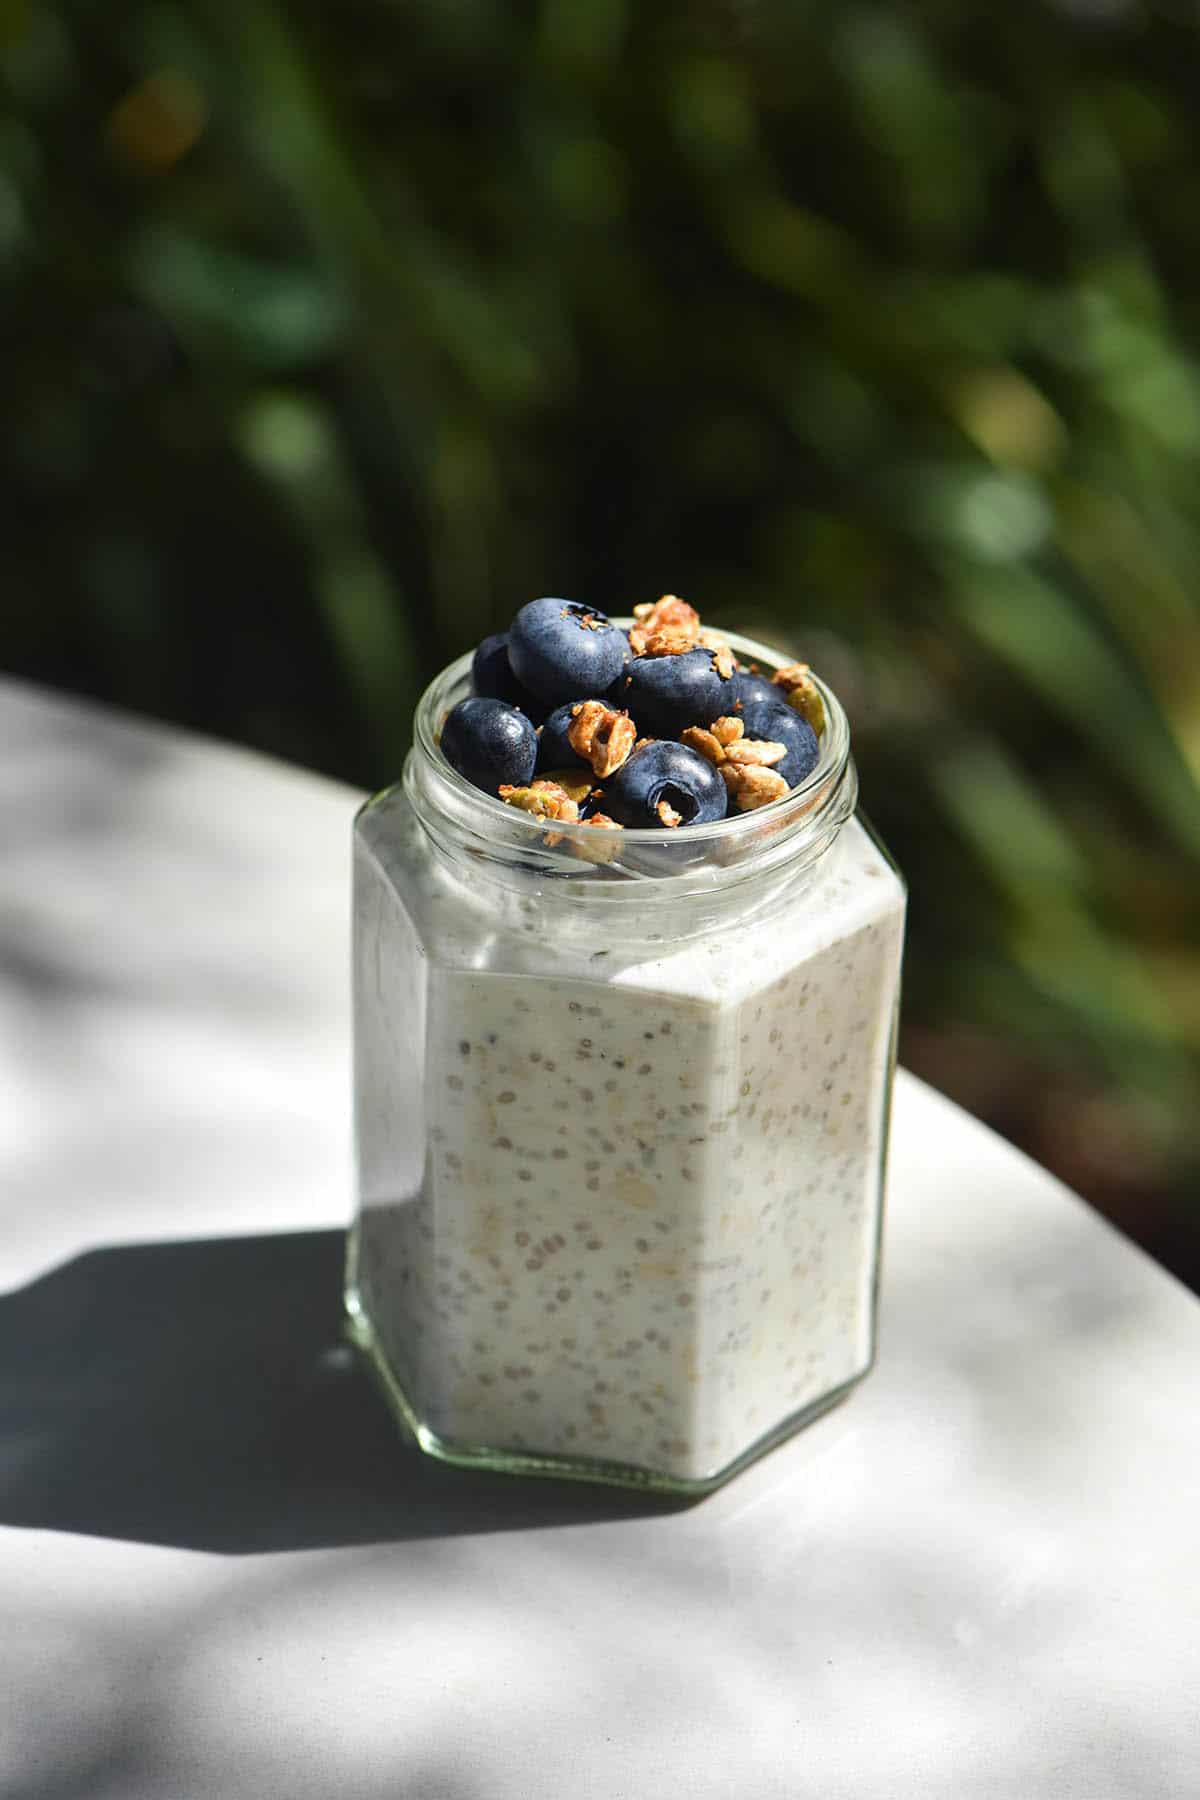 A side on image of a jar of low FODMAP overnight oats in bright dappled sunlight. The jar is topped with blueberries and granola and sits on a grey outdoor table in front of a leafy green bokeh background